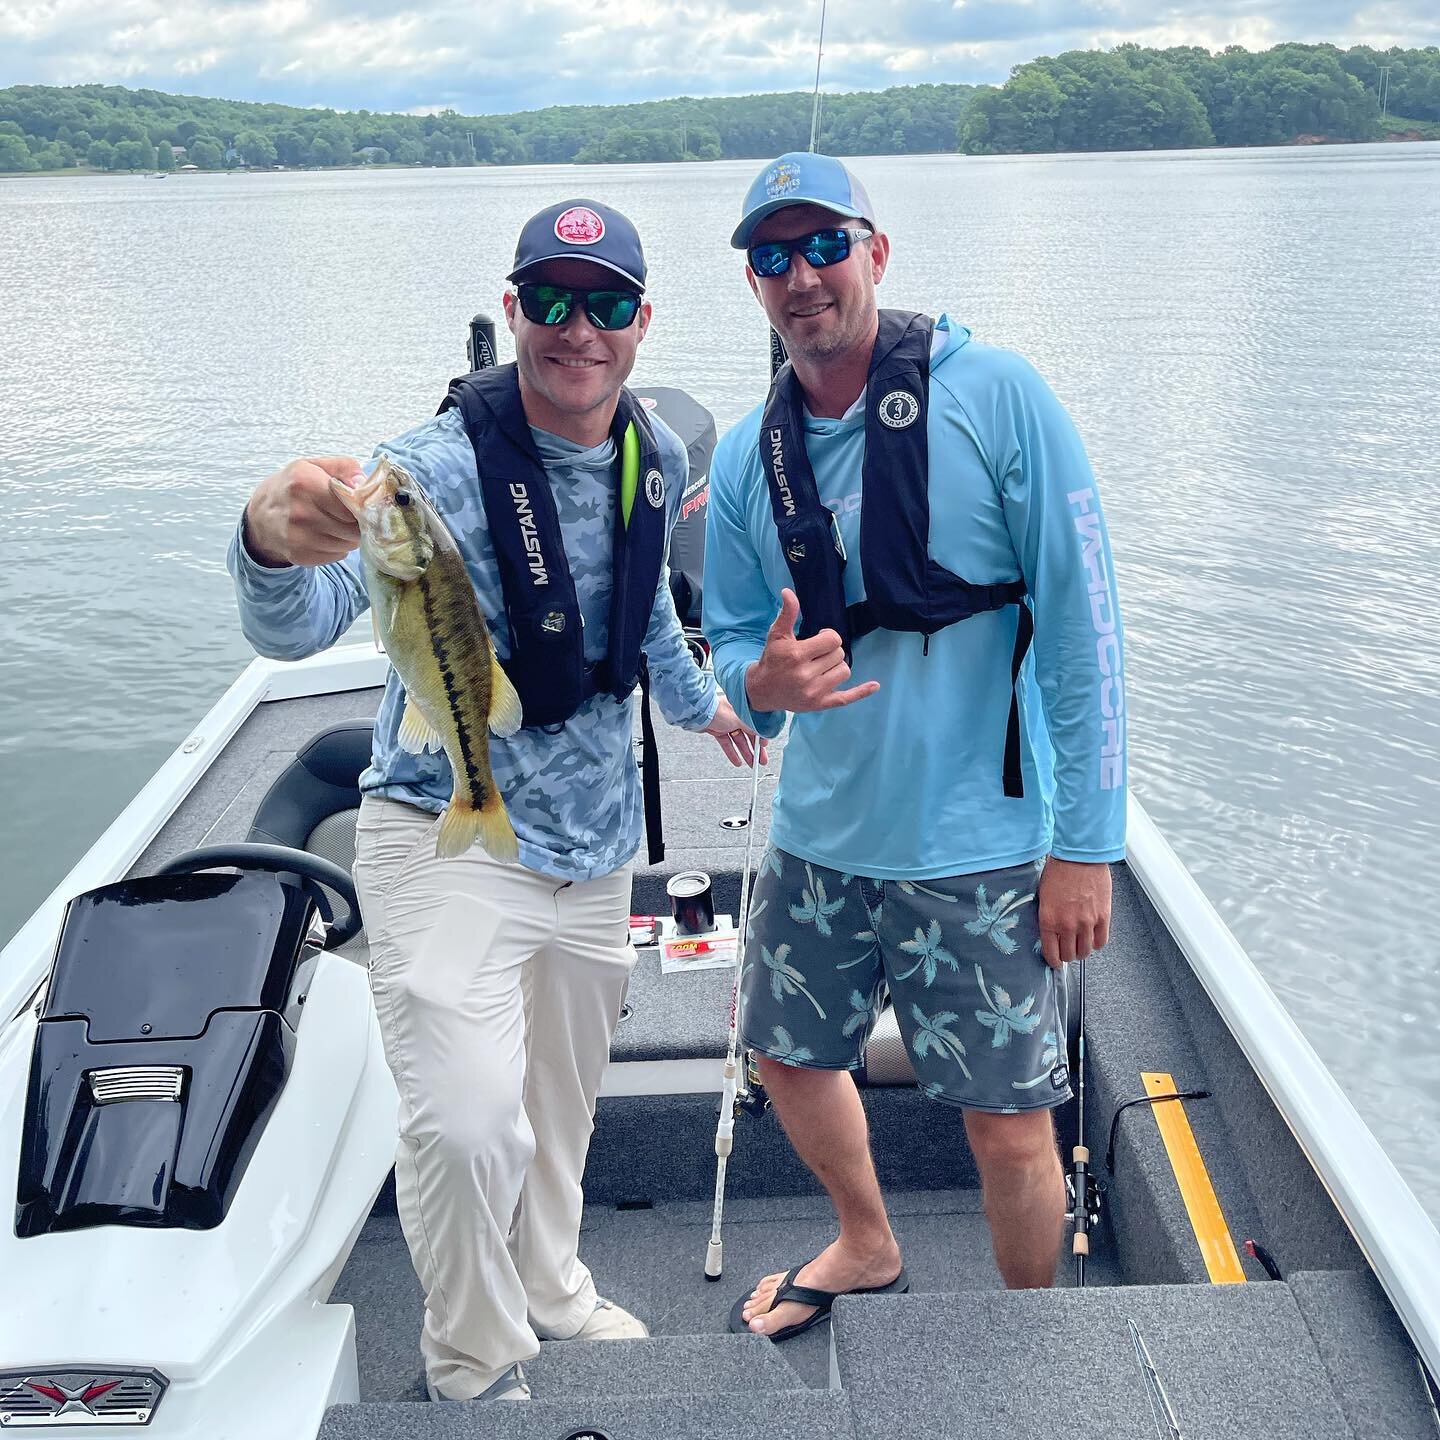 Had a chance to get out on the water with @mike.ray.clt with @atlanticbaymortgagegroup last week and talk fishing and Real Estate! Need a mortgage? Send mike a DM.
.
.
.

#charlotterealproducers #charlottemortgage #cltrealestate #ncrealtor #clthomes 